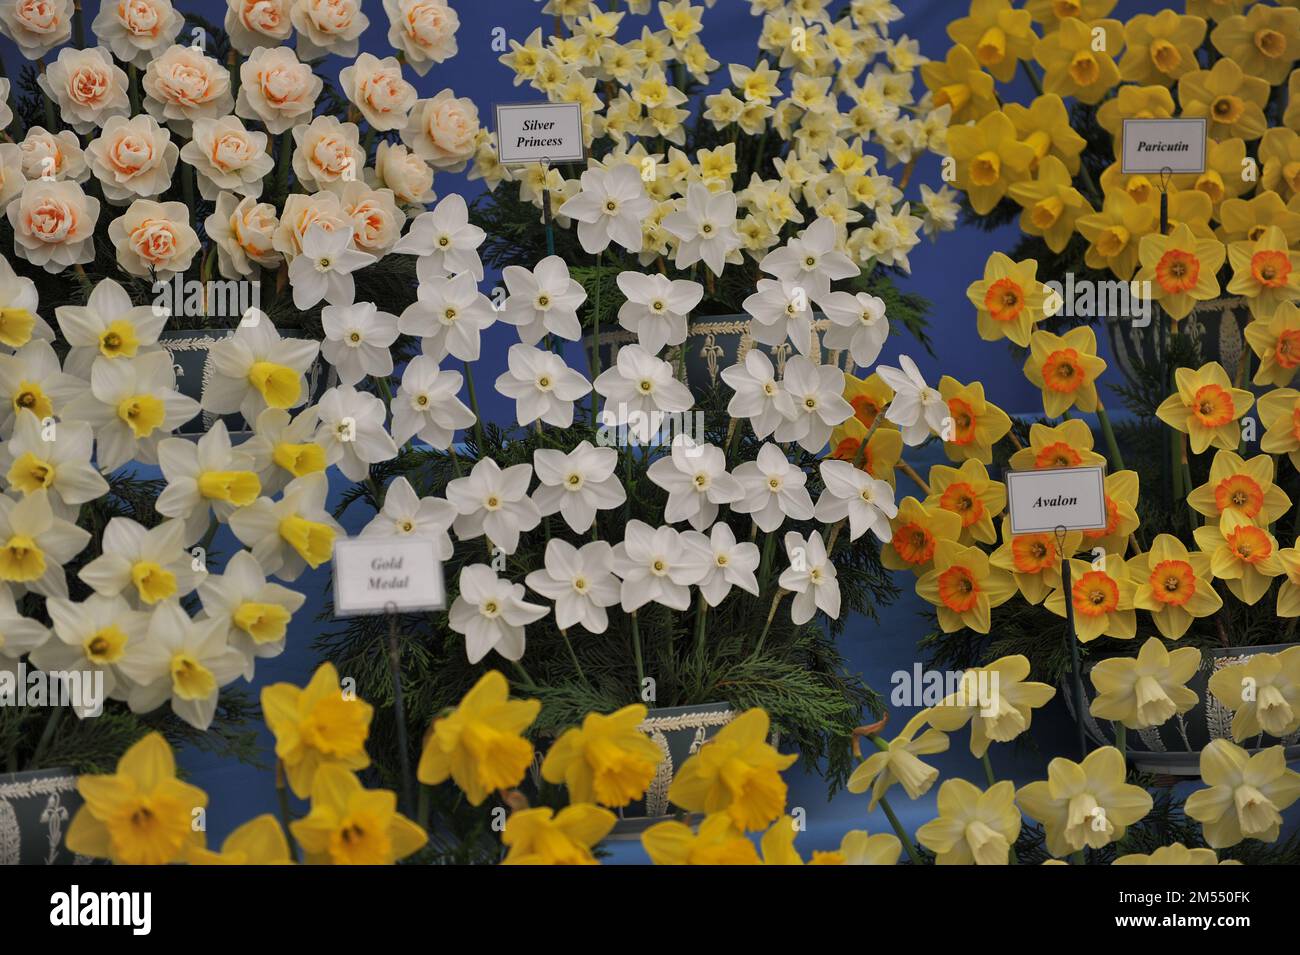 A bouquet of white Small-Cupped daffodils (Narcissus) Silver Princess on an exhibition in May Stock Photo